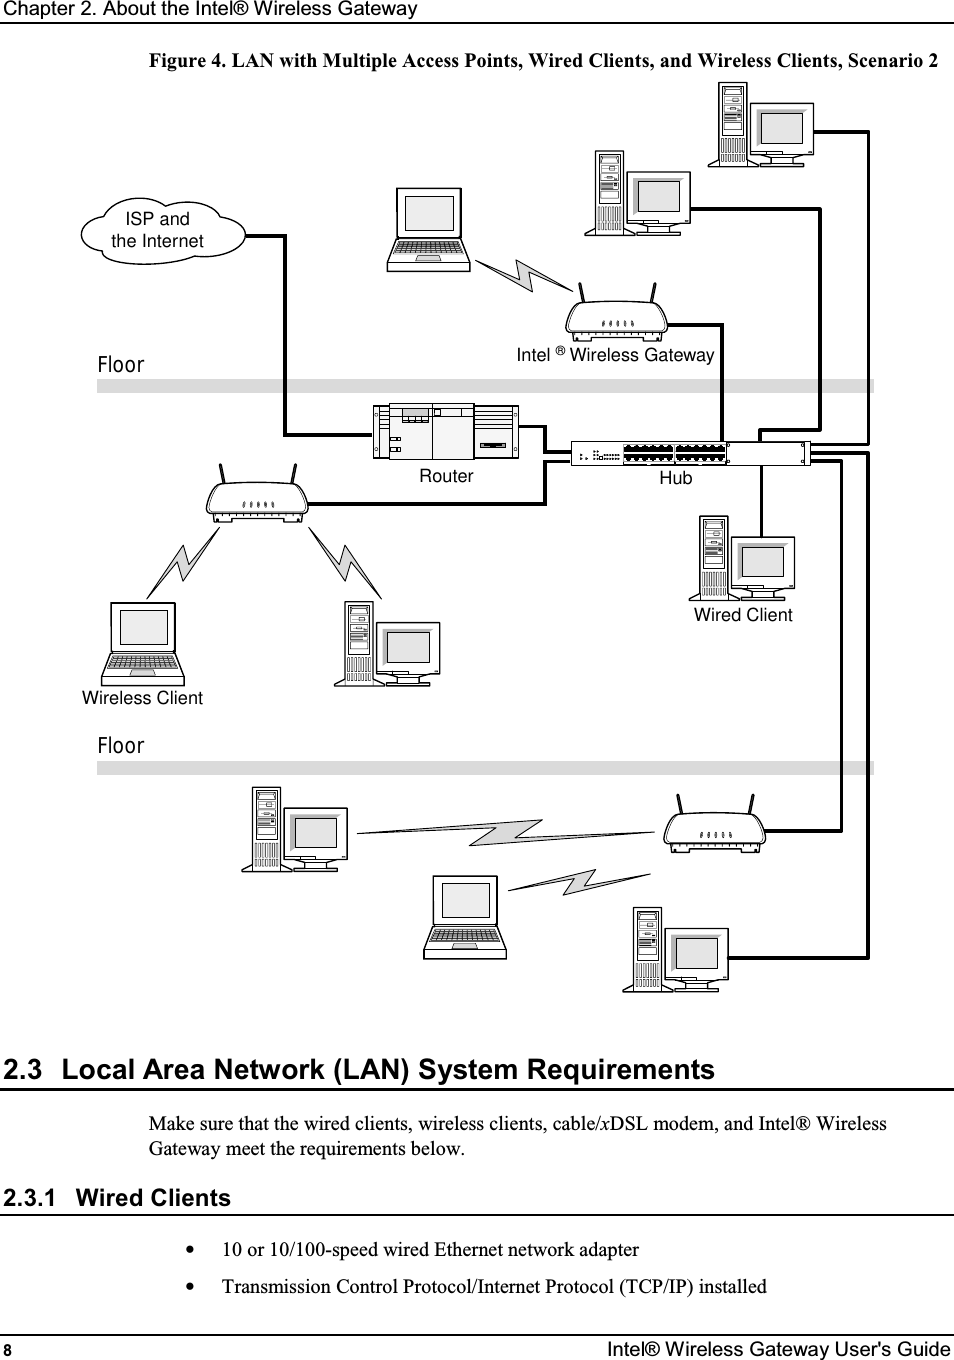 Chapter 2. About the Intel® Wireless Gateway 8  Intel® Wireless Gateway User&apos;s Guide Figure 4. LAN with Multiple Access Points, Wired Clients, and Wireless Clients, Scenario 2 CRouter HubWired ClientISP andthe InternetIntel ® Wireless GatewayWireless ClientFloorFloor 2.3  Local Area Network (LAN) System Requirements Make sure that the wired clients, wireless clients, cable/xDSL modem, and Intel® Wireless Gateway meet the requirements below. 2.3.1  Wired Clients •  10 or 10/100-speed wired Ethernet network adapter •  Transmission Control Protocol/Internet Protocol (TCP/IP) installed 